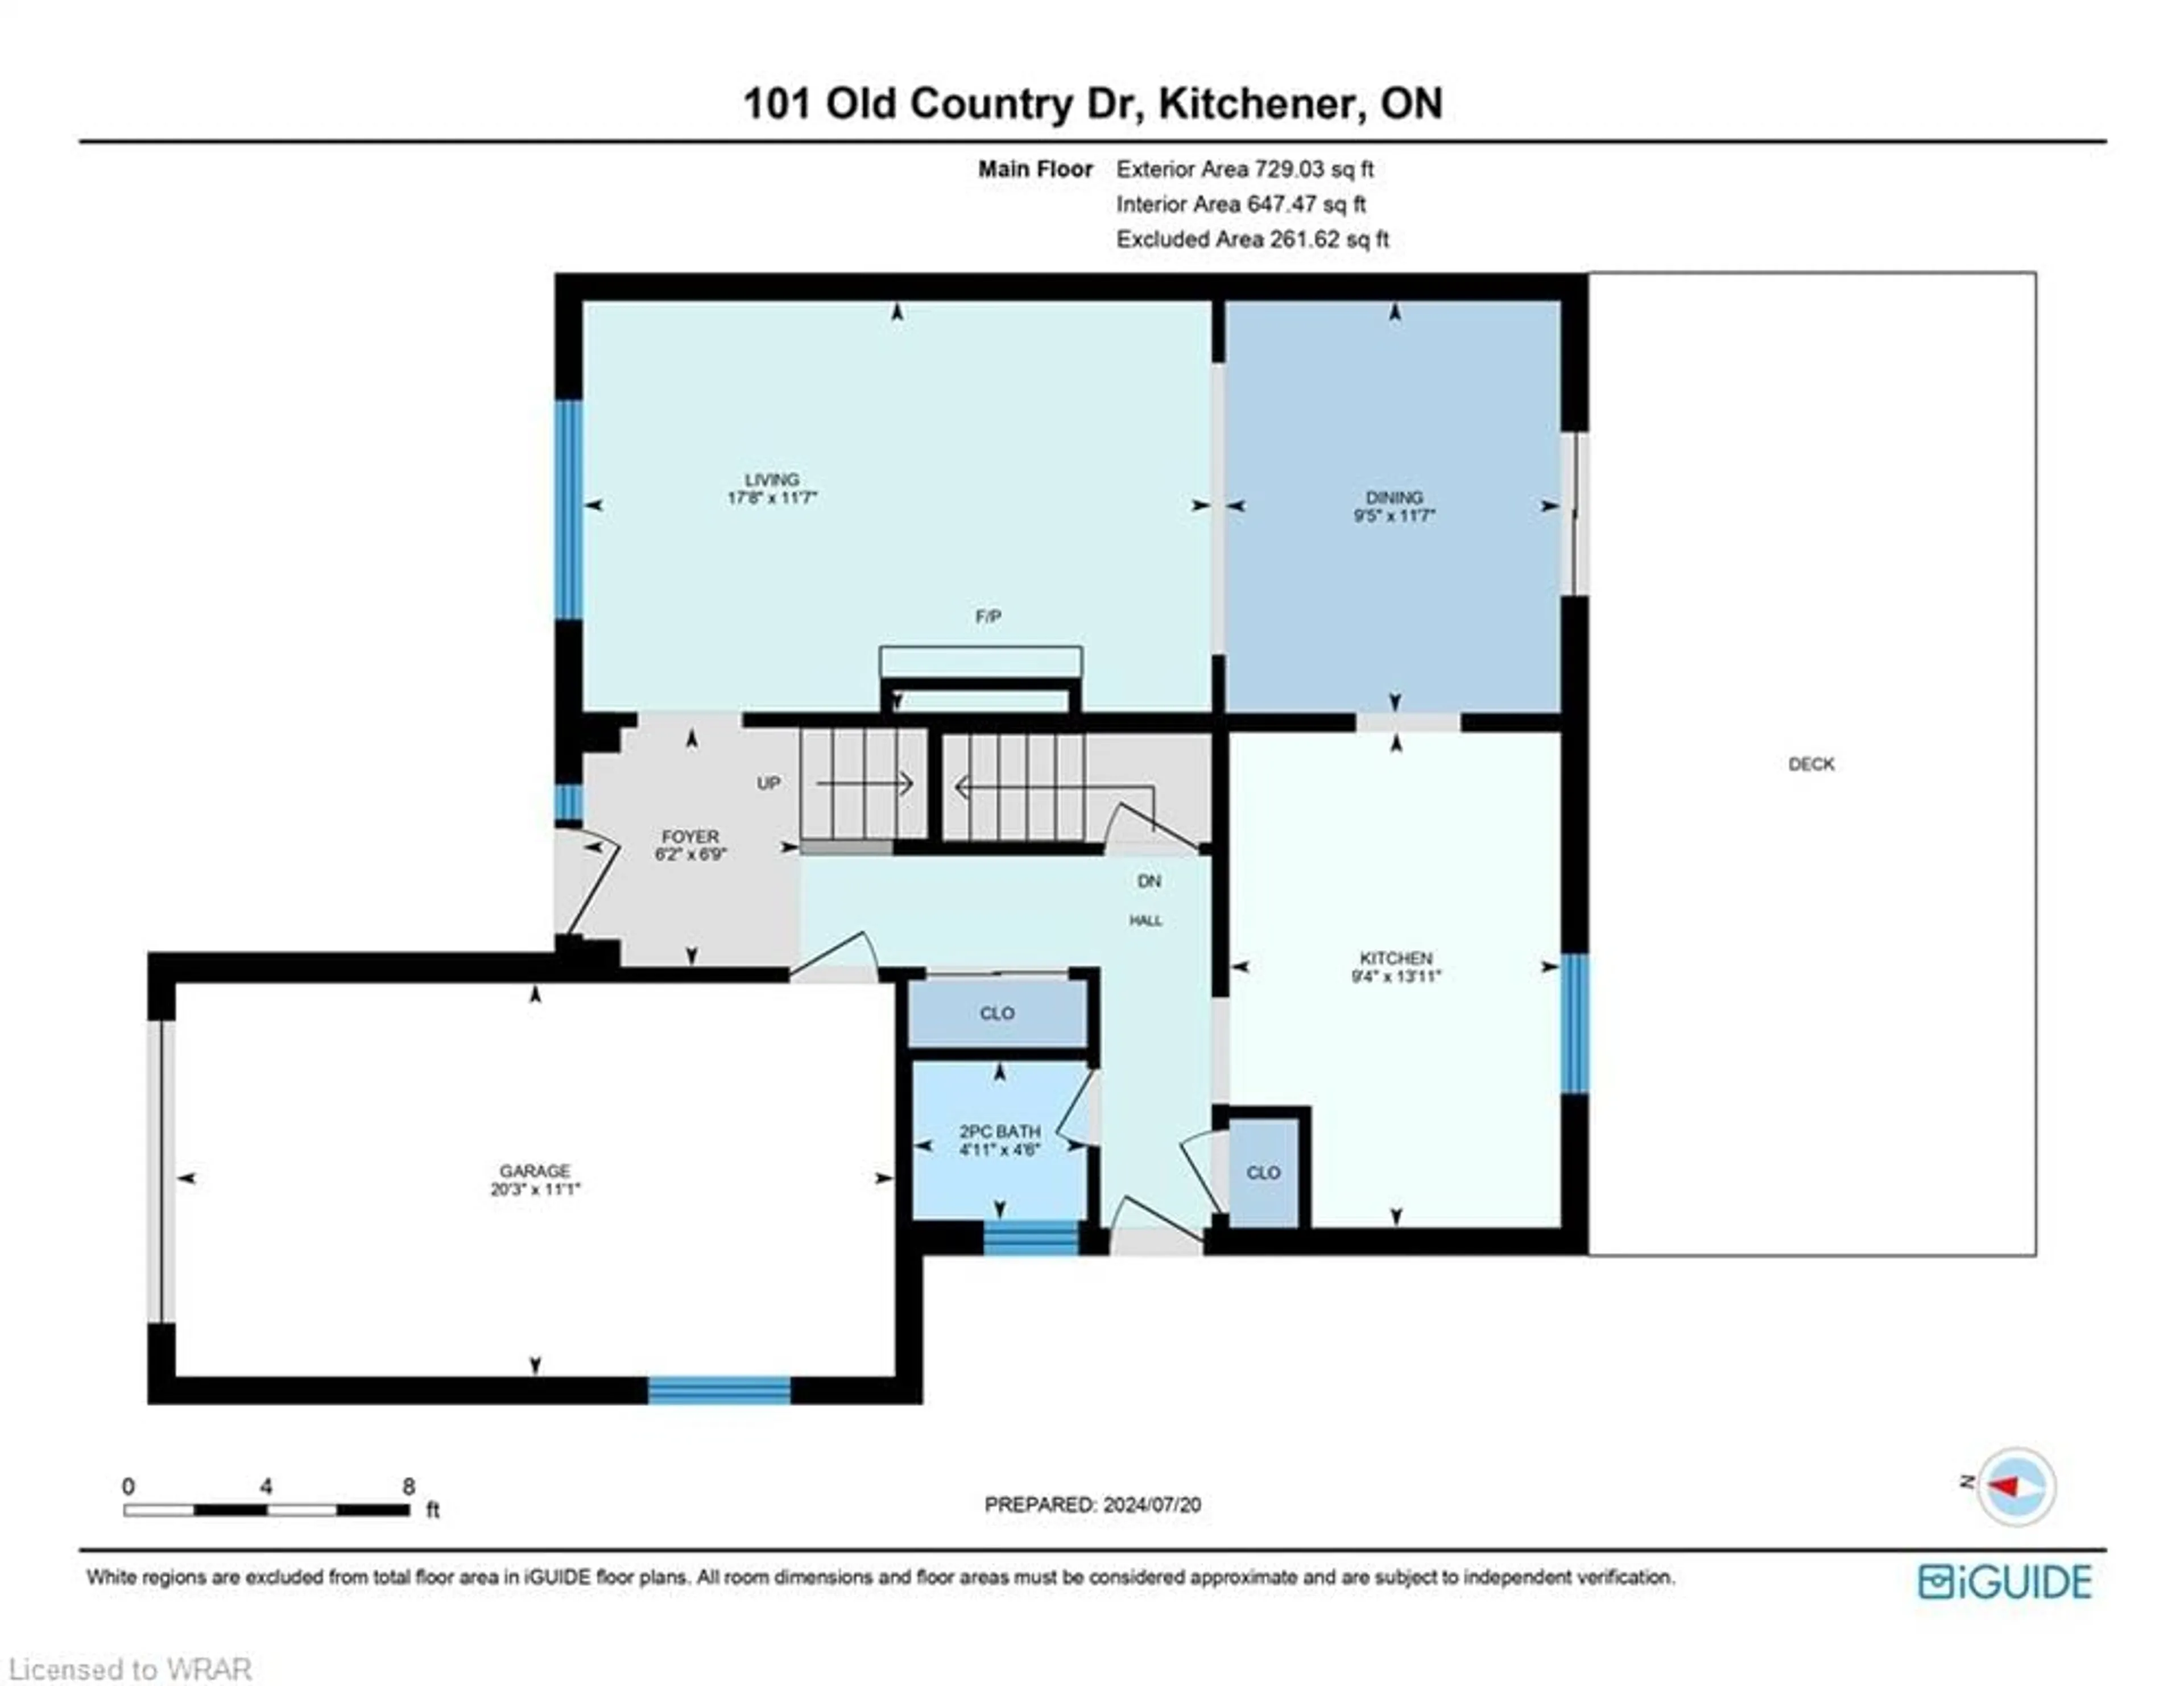 Floor plan for 101 Old Country Dr, Kitchener Ontario N2E 1S4